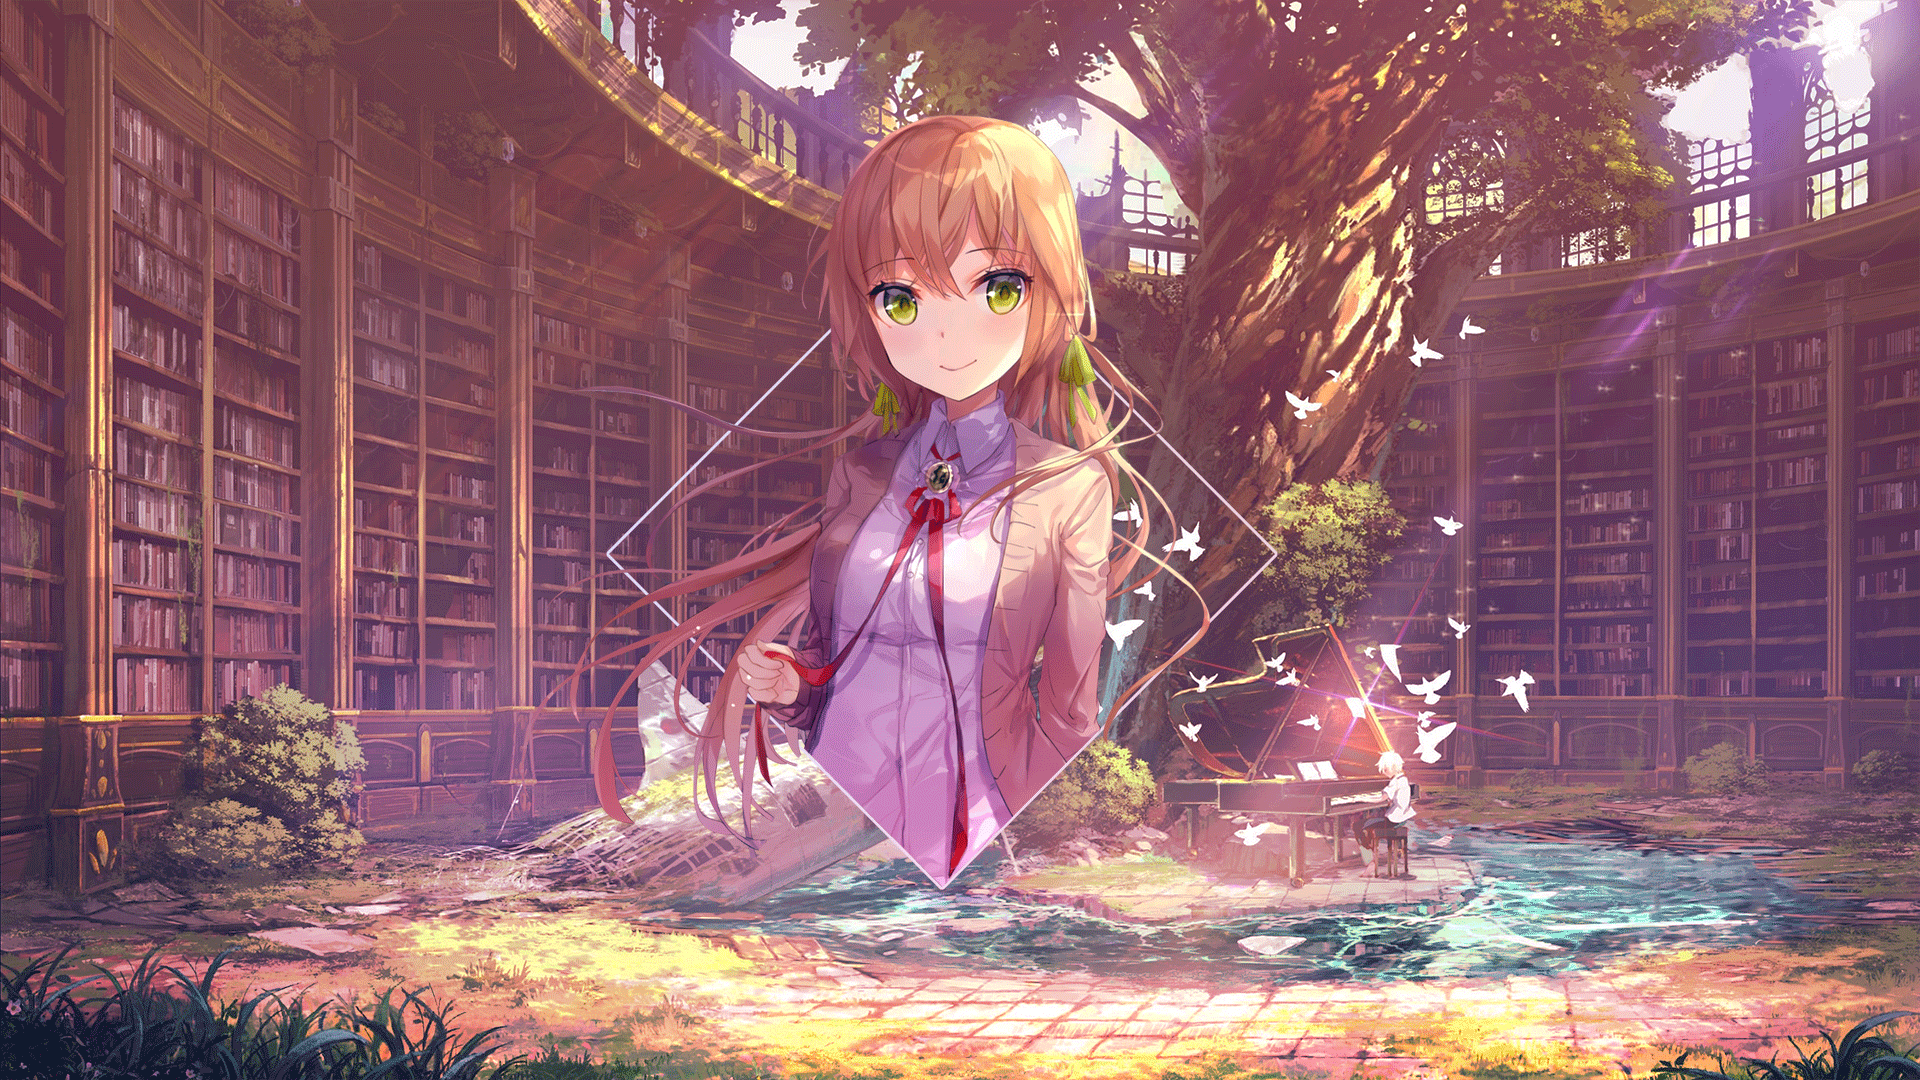 Anime Anime Girls Books Trees Piano Photoshop Anime Landscape Digital Art Picture In Picture Piture  1920x1080